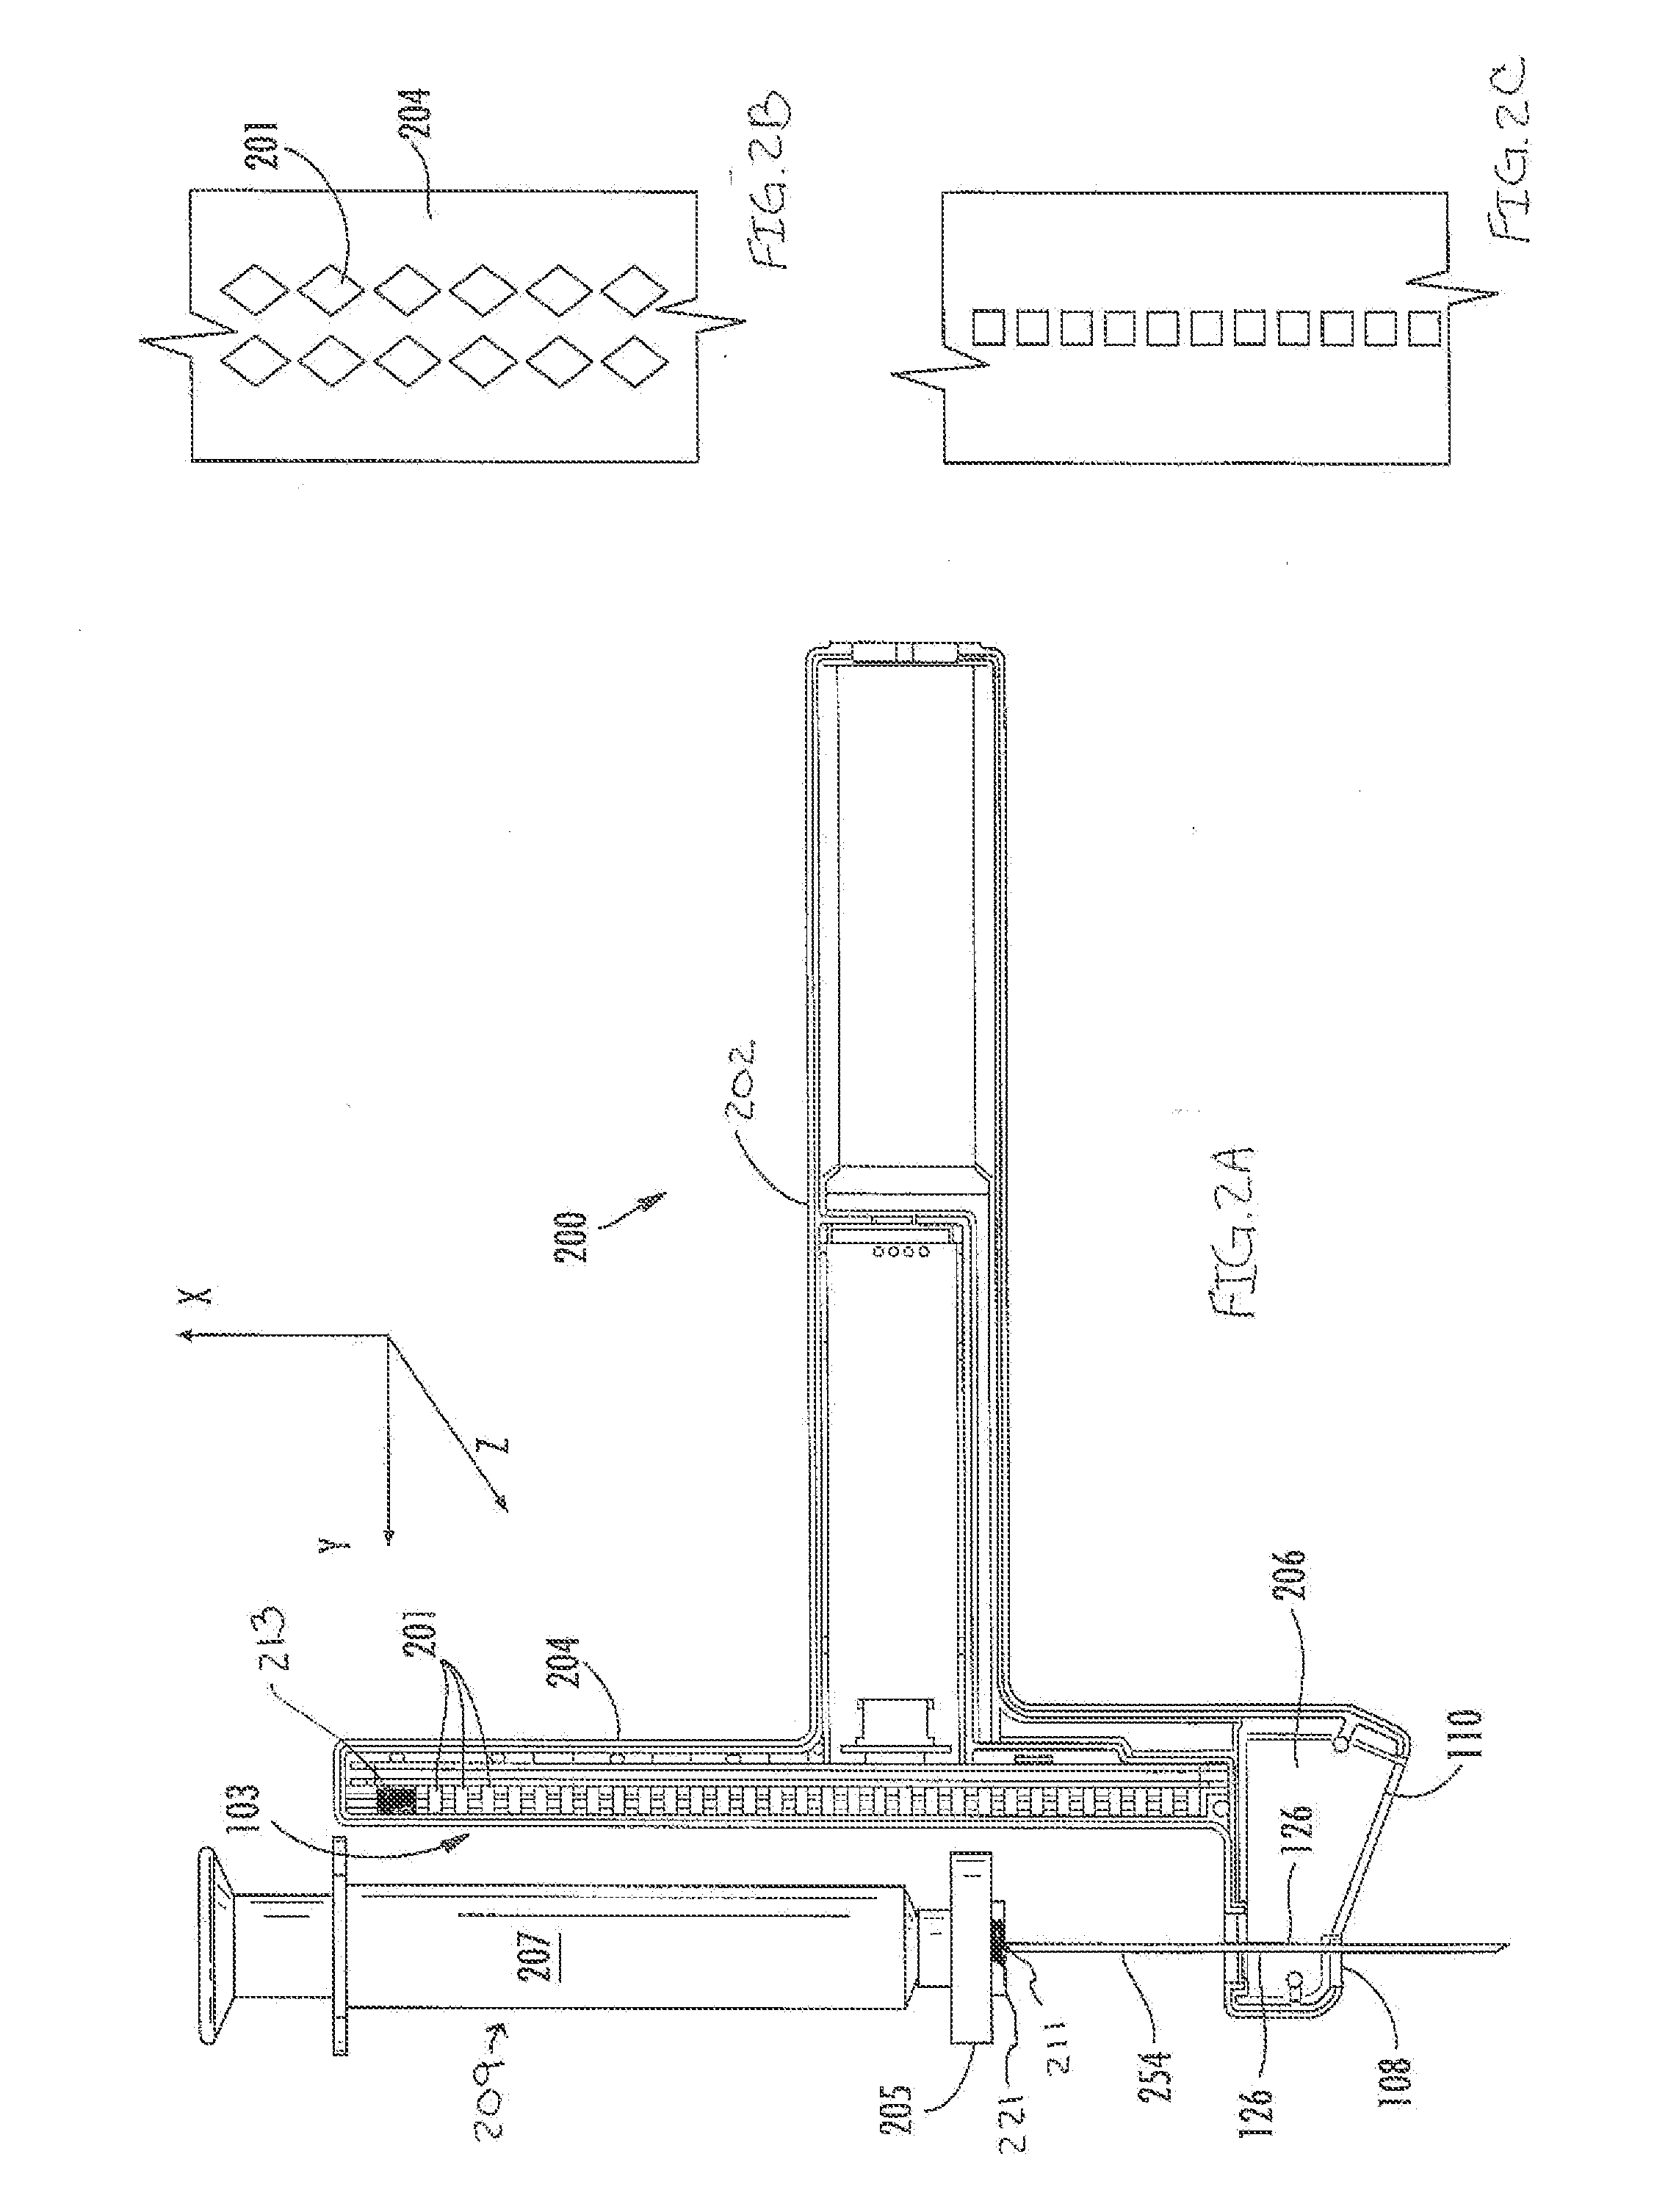 Ultrasound Guidance System Including Tagged Probe Assembly